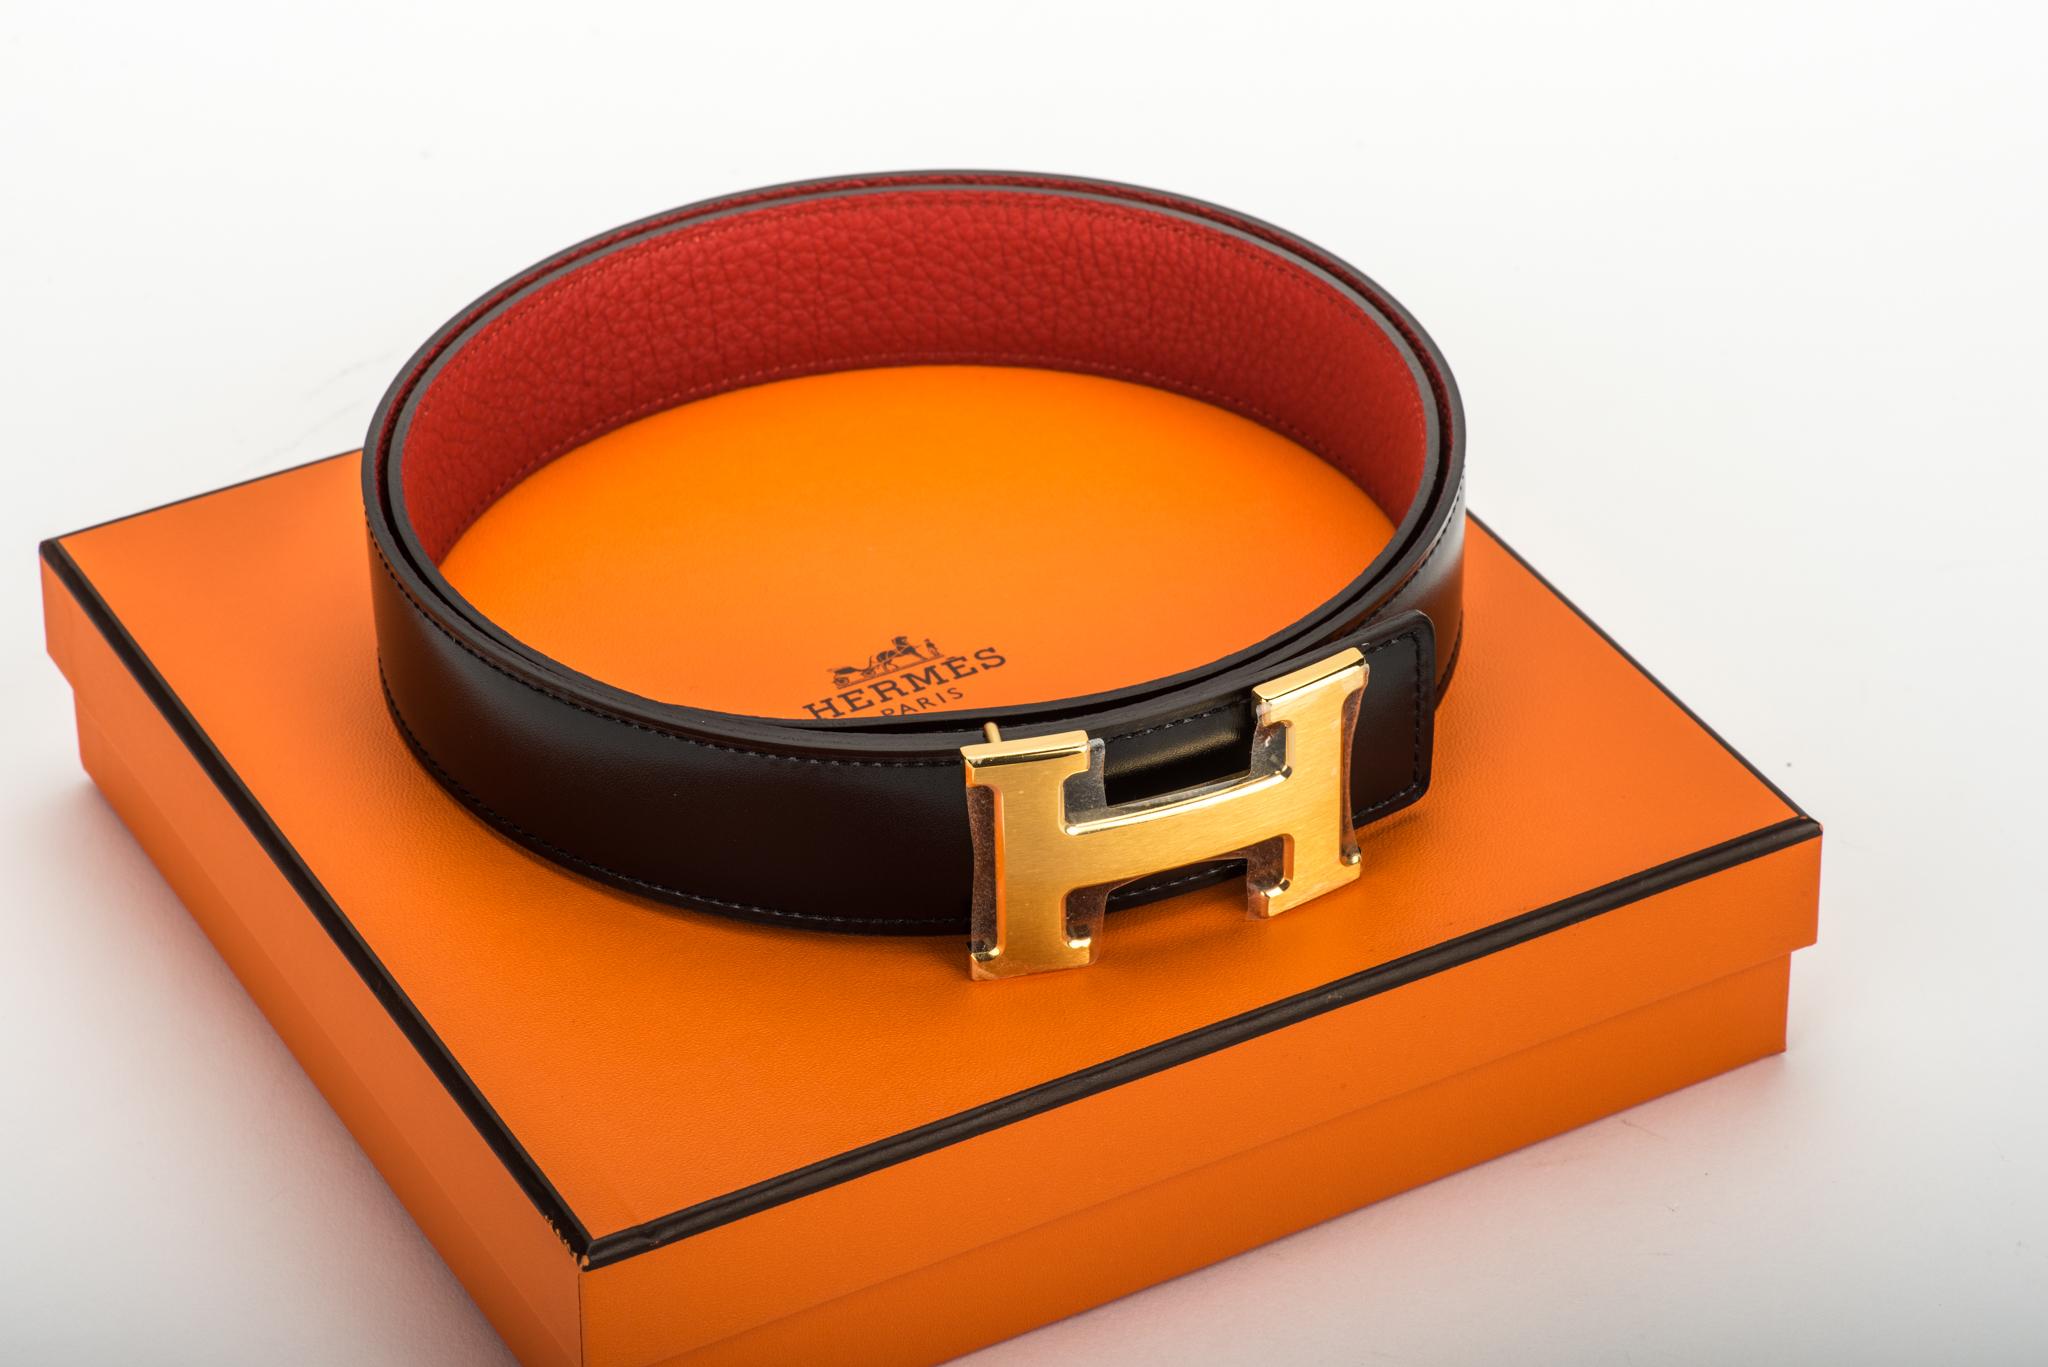 Hermes brand new in box reversible unisex H belt. Black box leather and vermillon clemence leather, gold tone buckle. European size 95cm. Date stamp T for 2015. Comes with dust cover, box, ribbon and shopping bag.